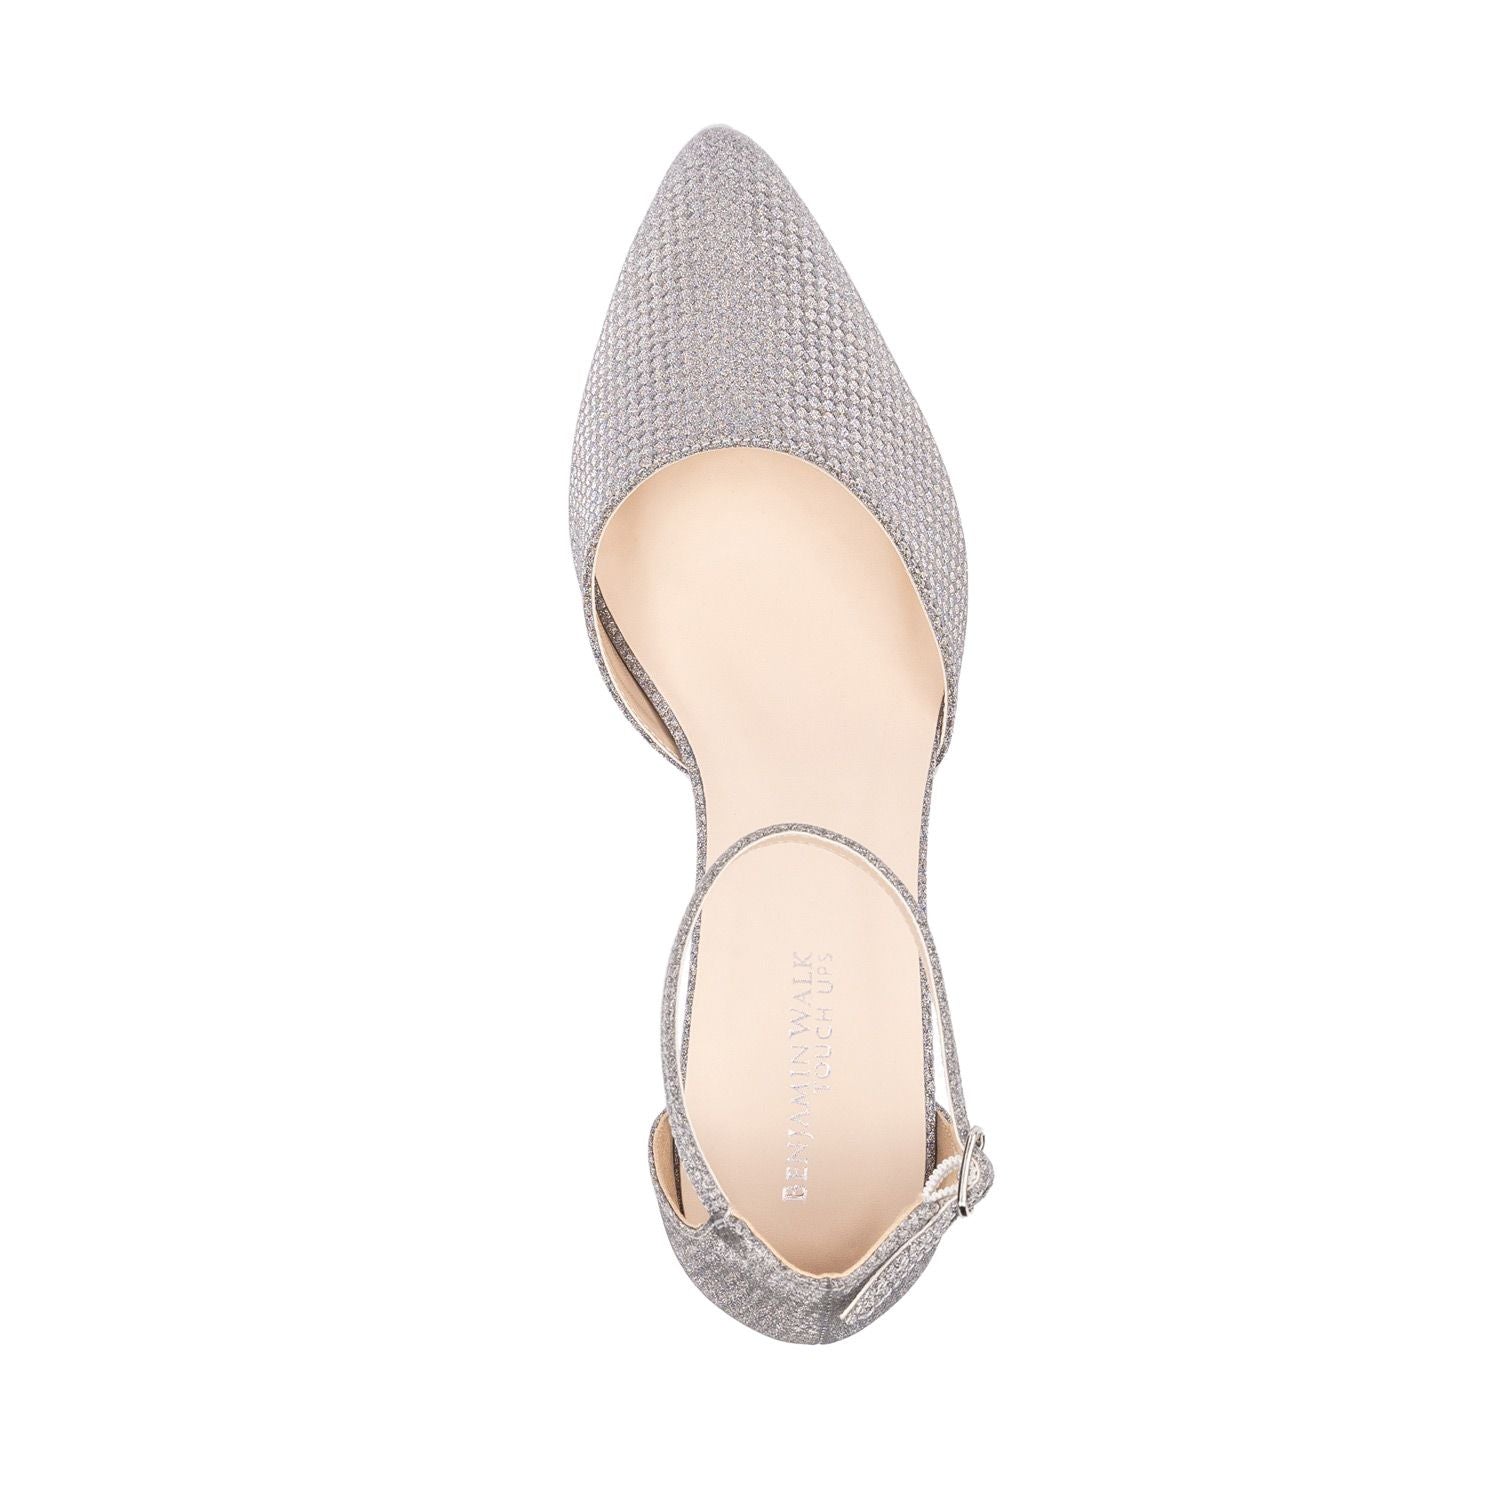 Overhead view of Closed toe shimmer shoe with 1.75 inch block heel